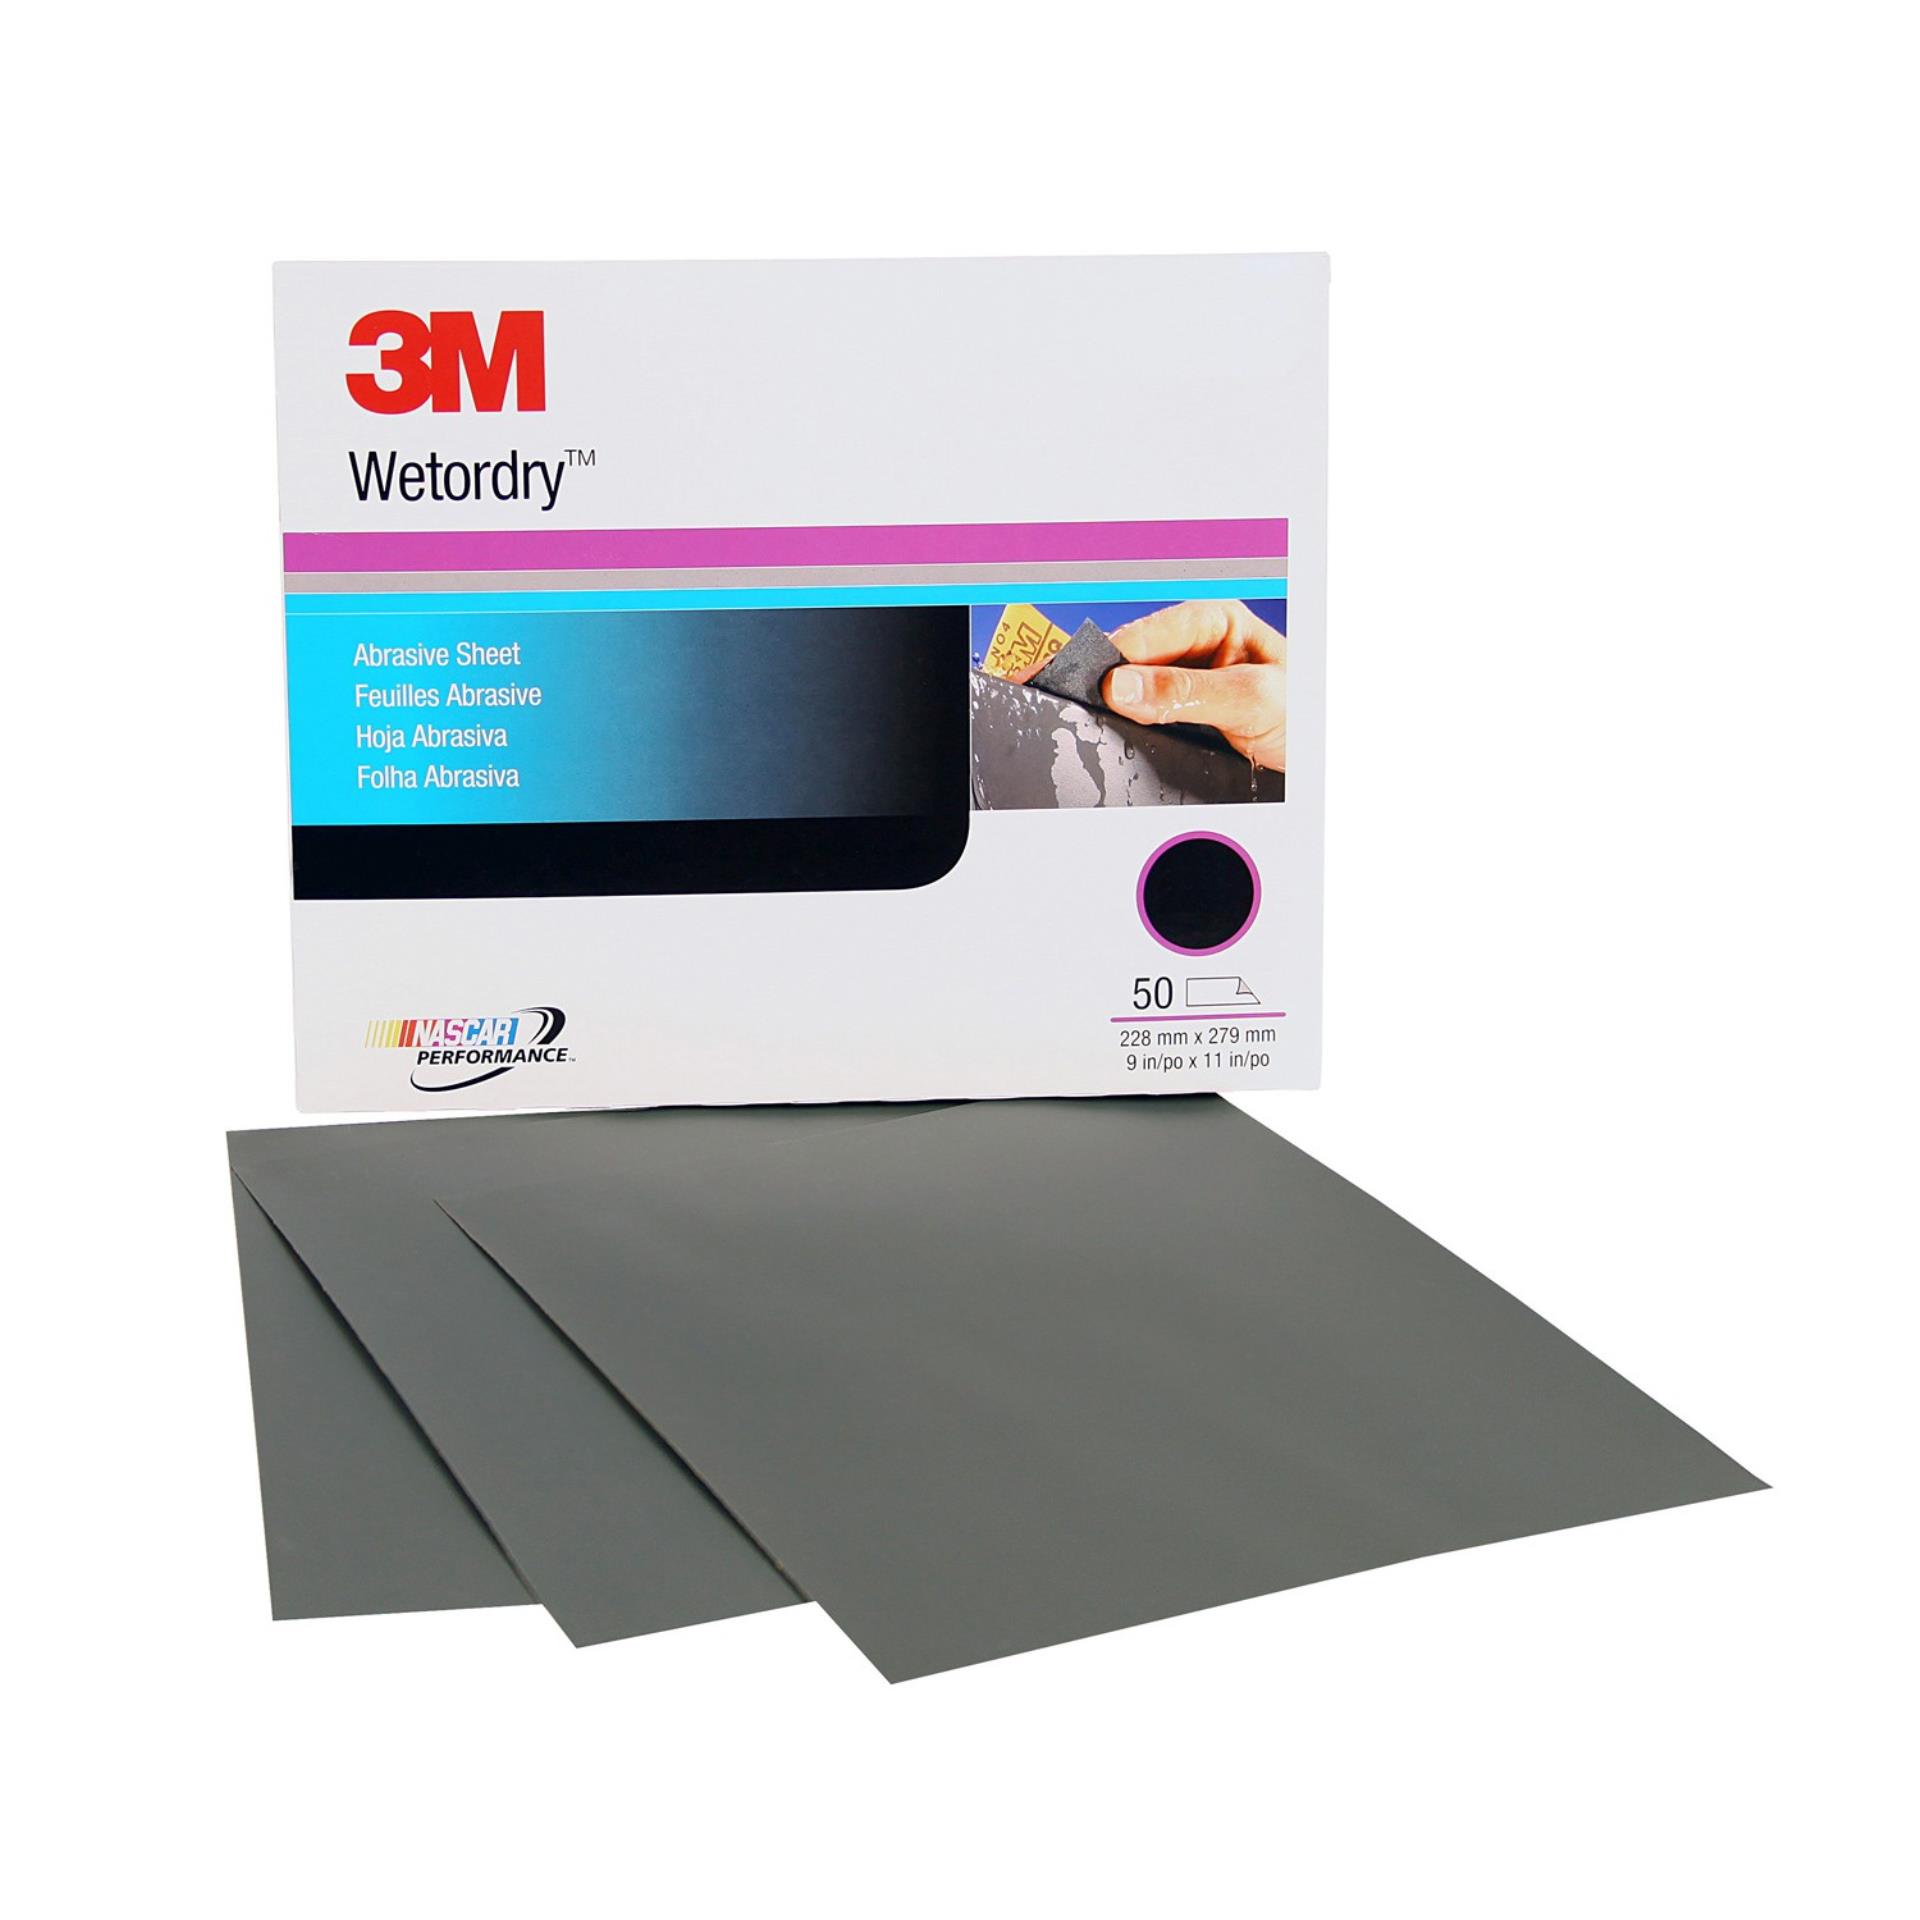 Sanding Sheets Sandpaper 115 x 280 mm Hole Punches Number 14 Grain 40 60 80 120 180 